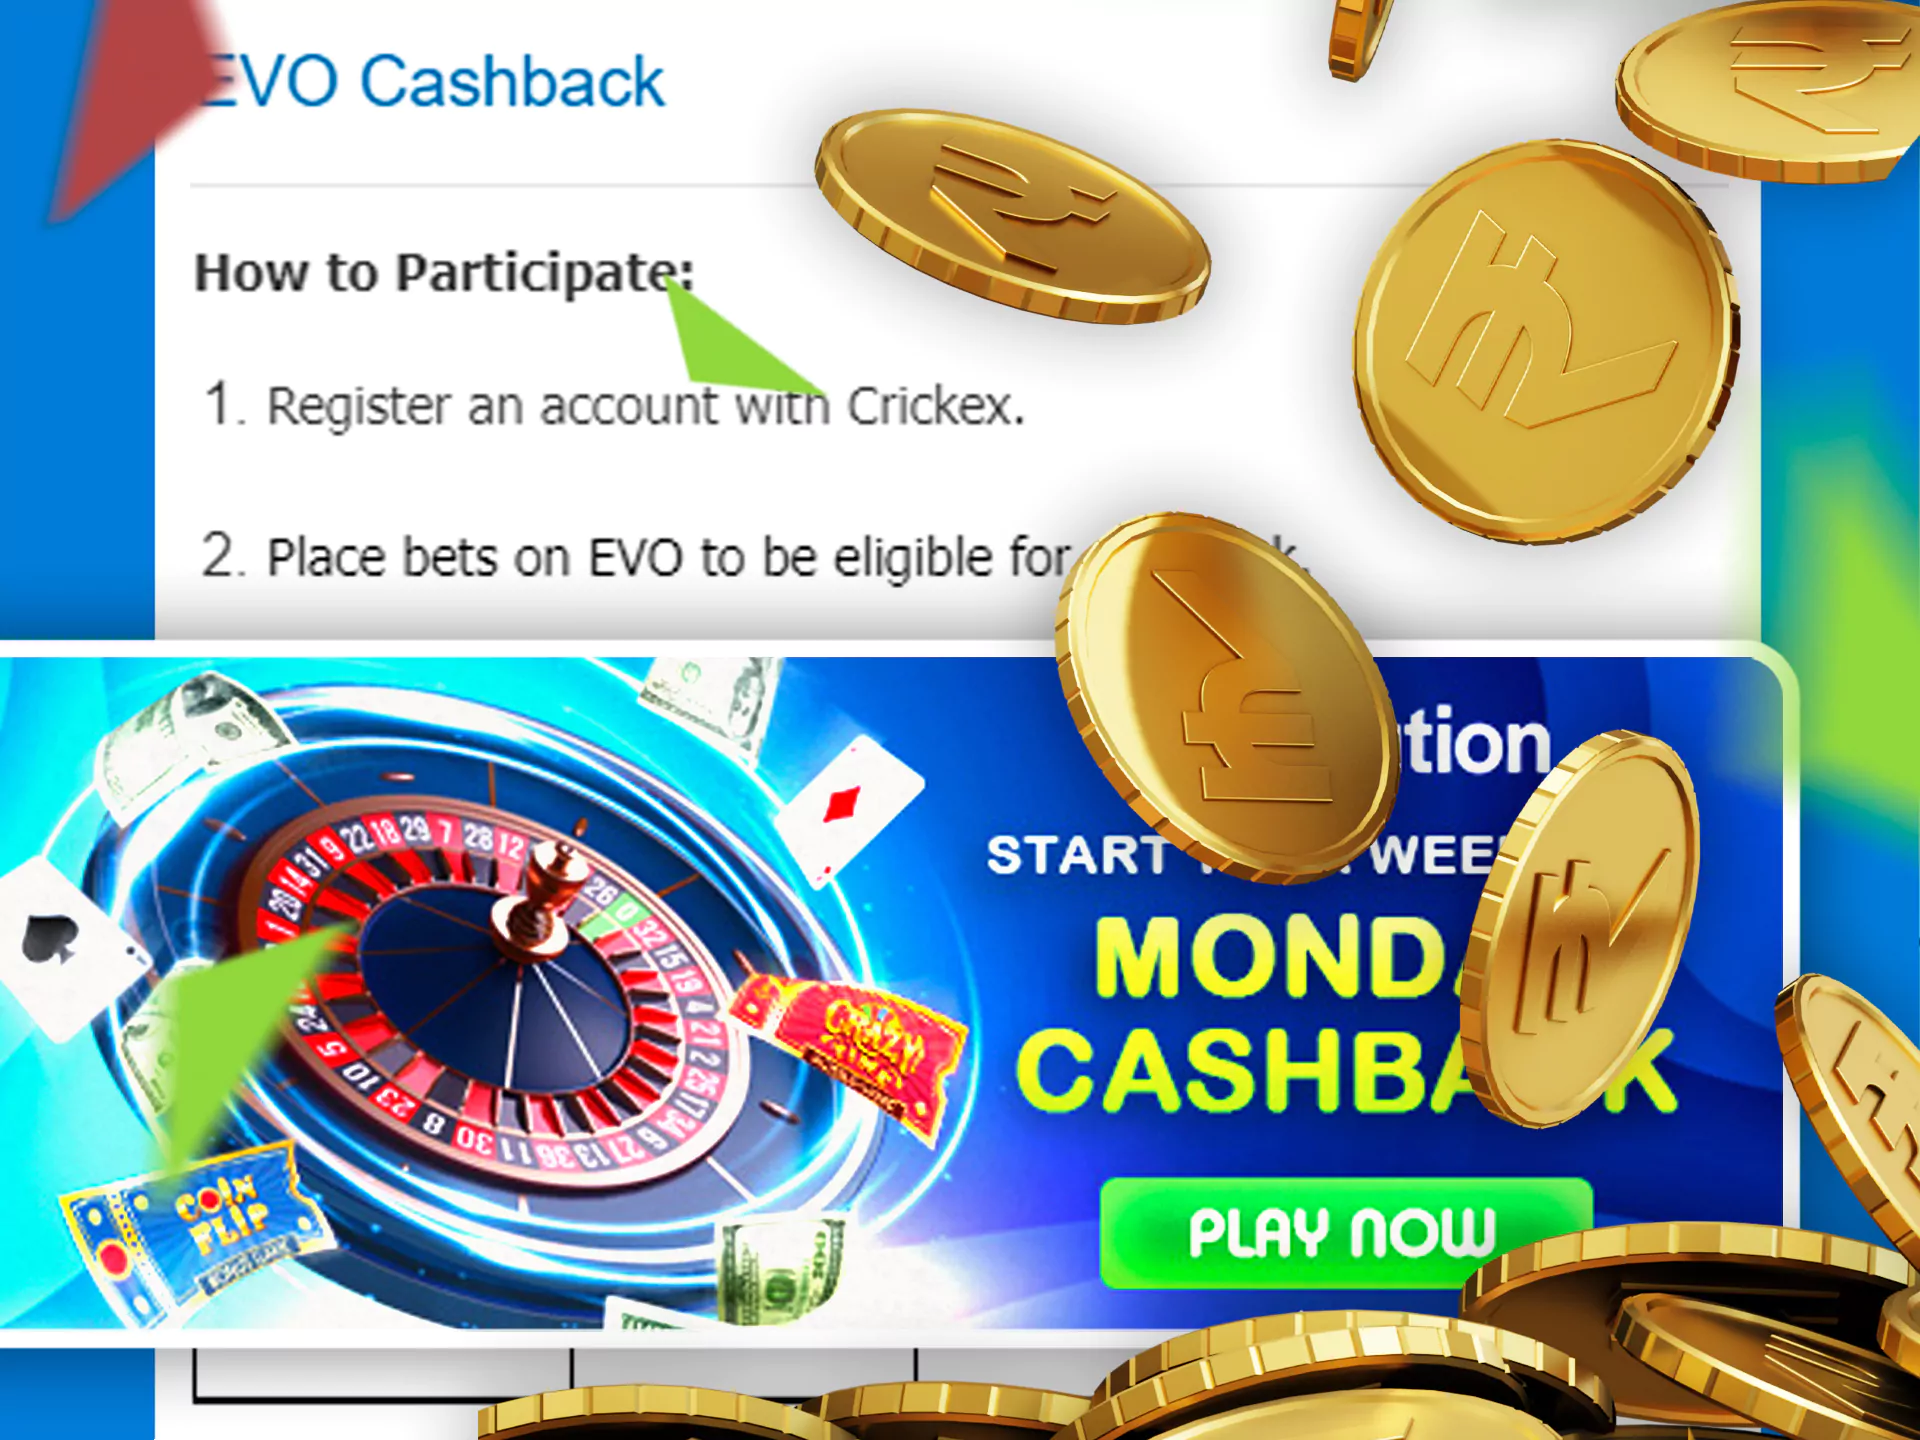 On Mondays, you can count on an additional special cashback.